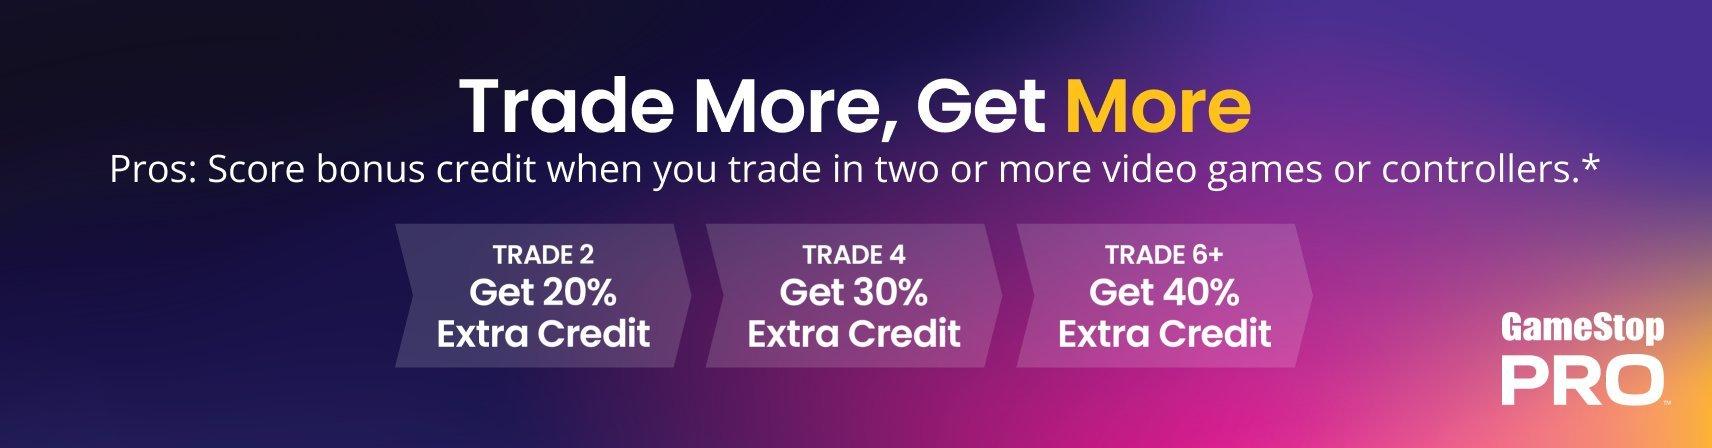 Pro Exclusive - Trade More Get More! Bonus Credit when Trading 2 or more Video Games or Controllers!